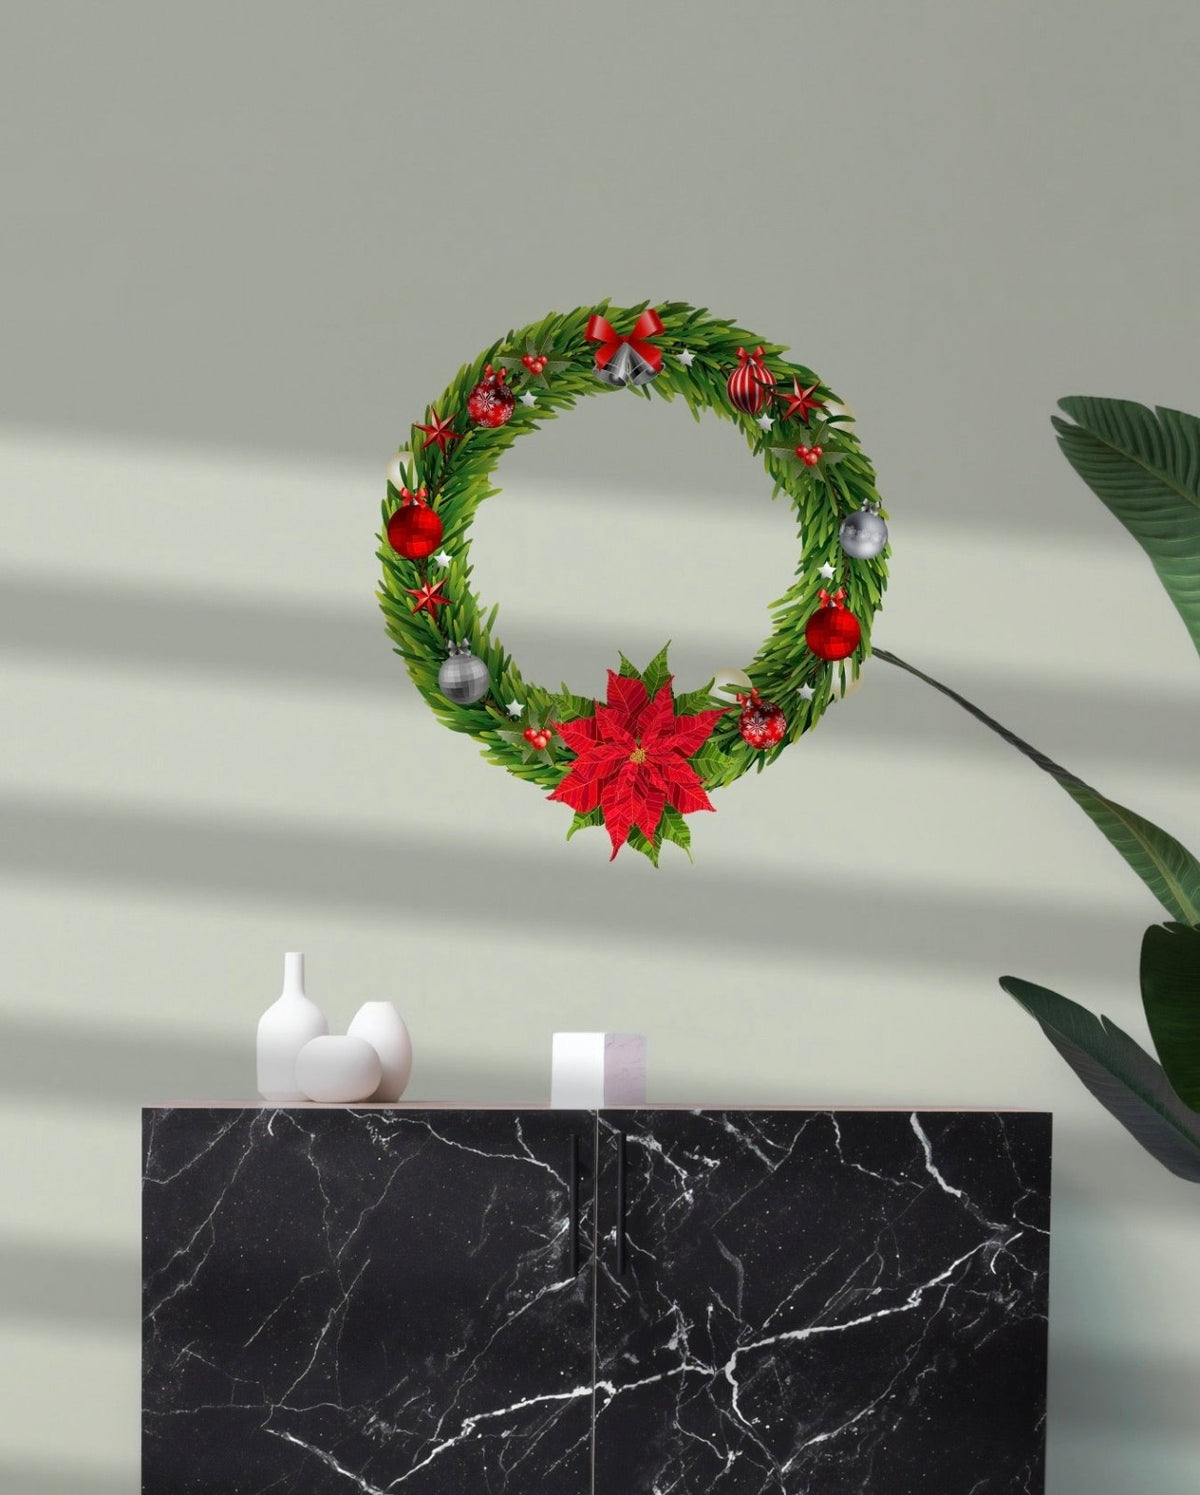 A Cover-Alls Christmas wreath decal with green foliage, red berries, and poinsettias hanging on a gray wall, above a black marble cabinet with two white vases.